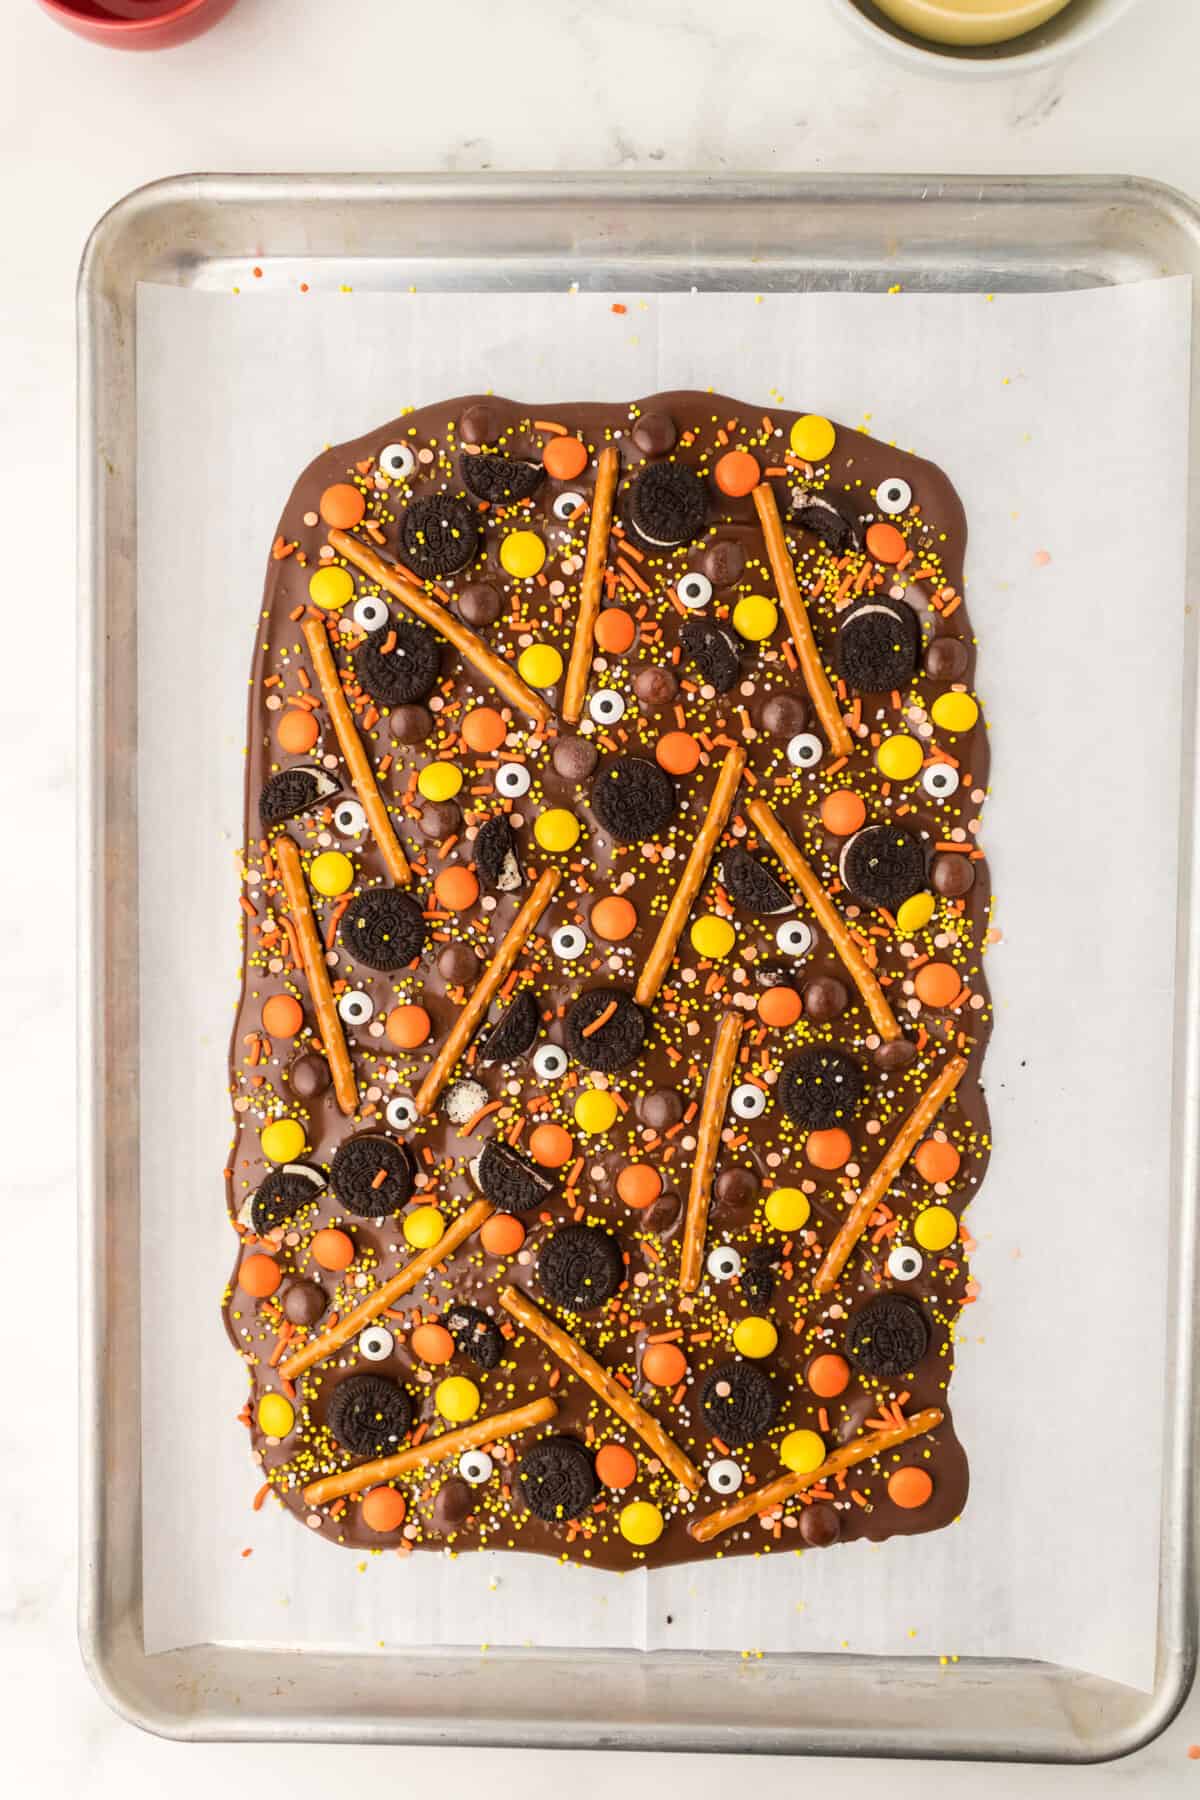 Sprinkle on the Halloween Sprinkles and Eye Candies all over the remaining chocolate. Put into the refrigerator to harden